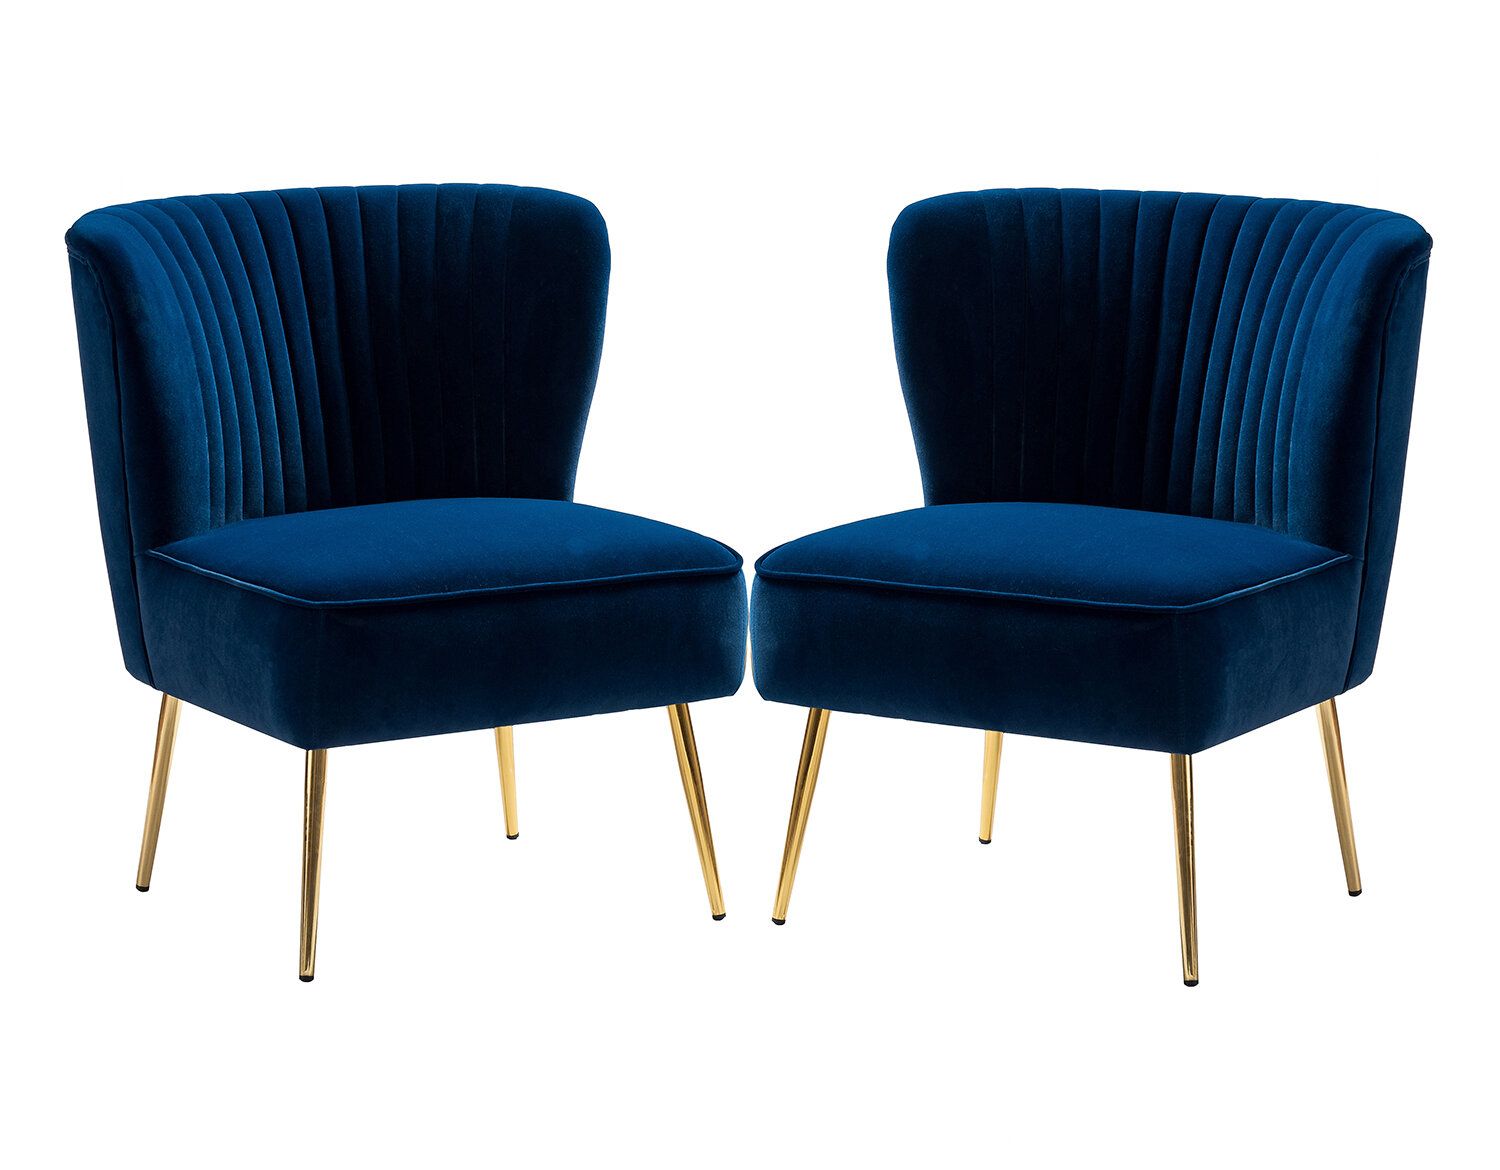 Accent Chairs | Up To 60% Off Through 01/19 | Wayfair Within Erasmus Velvet Side Chairs (Set Of 2) (View 7 of 15)